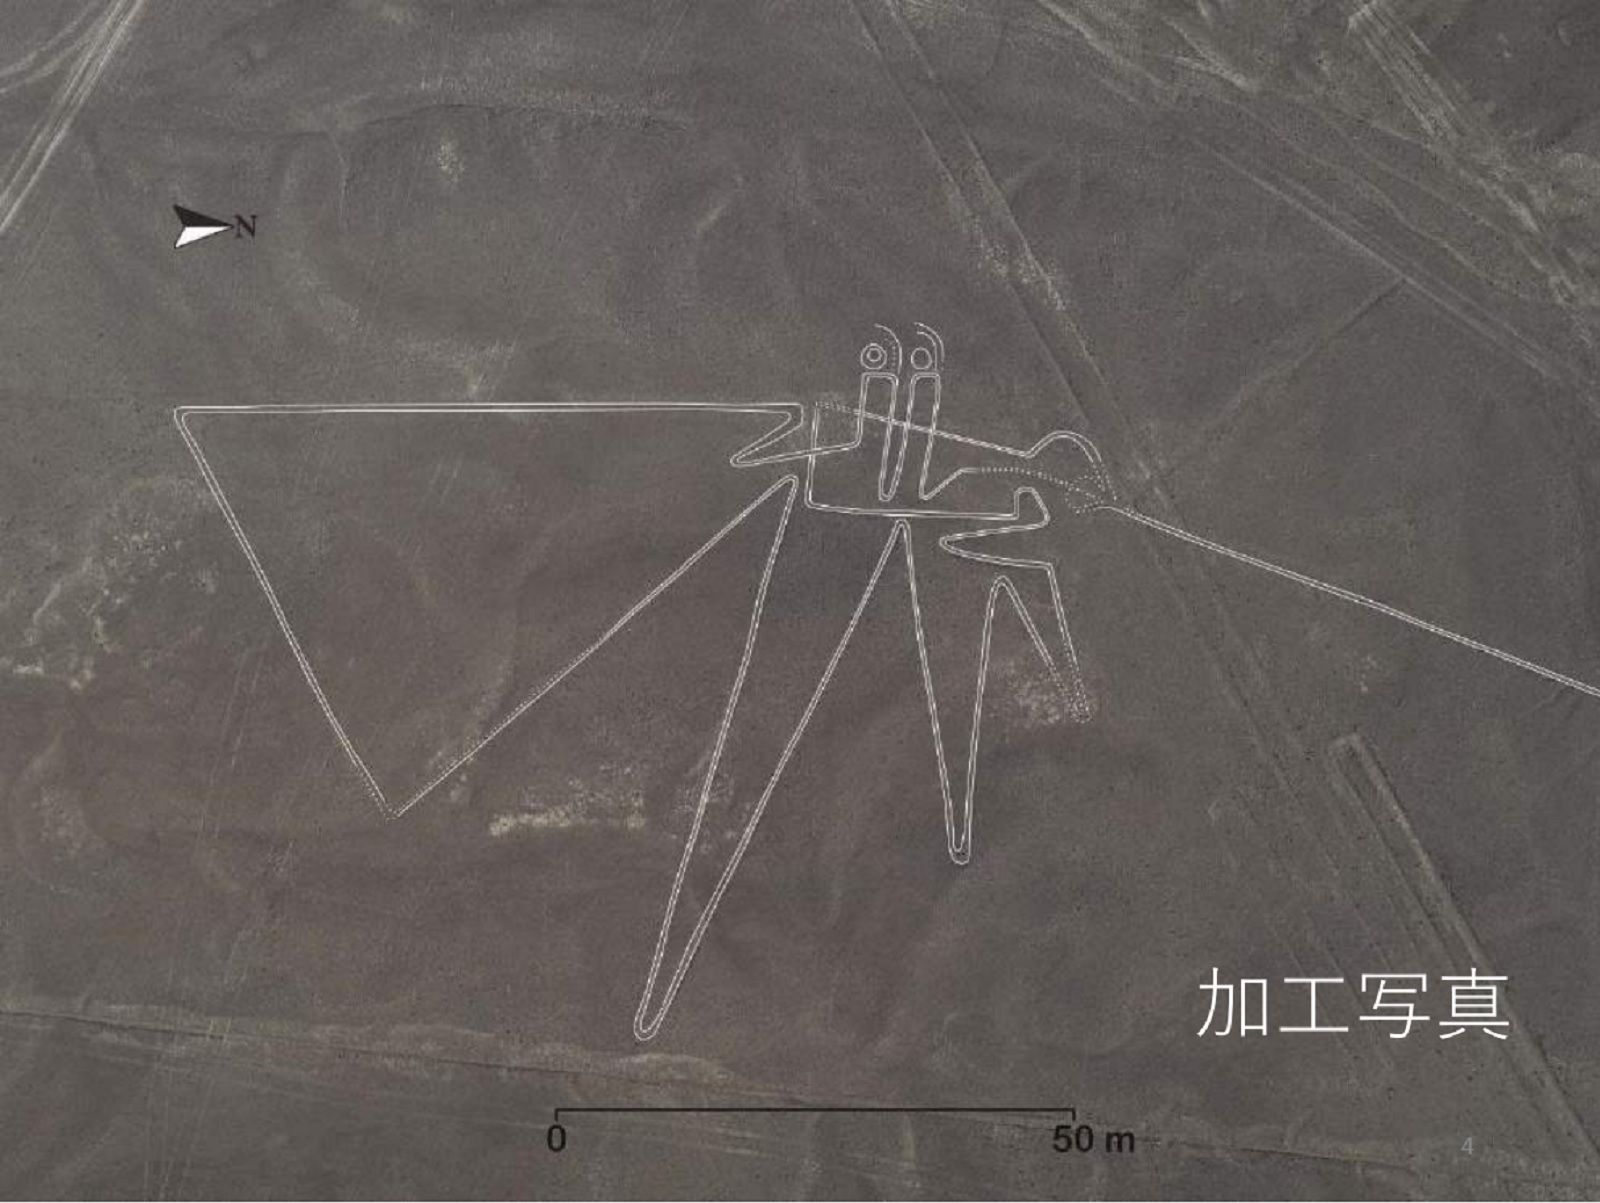 Scientists use IBM AI to discover mysterious drawings in Peru image 5